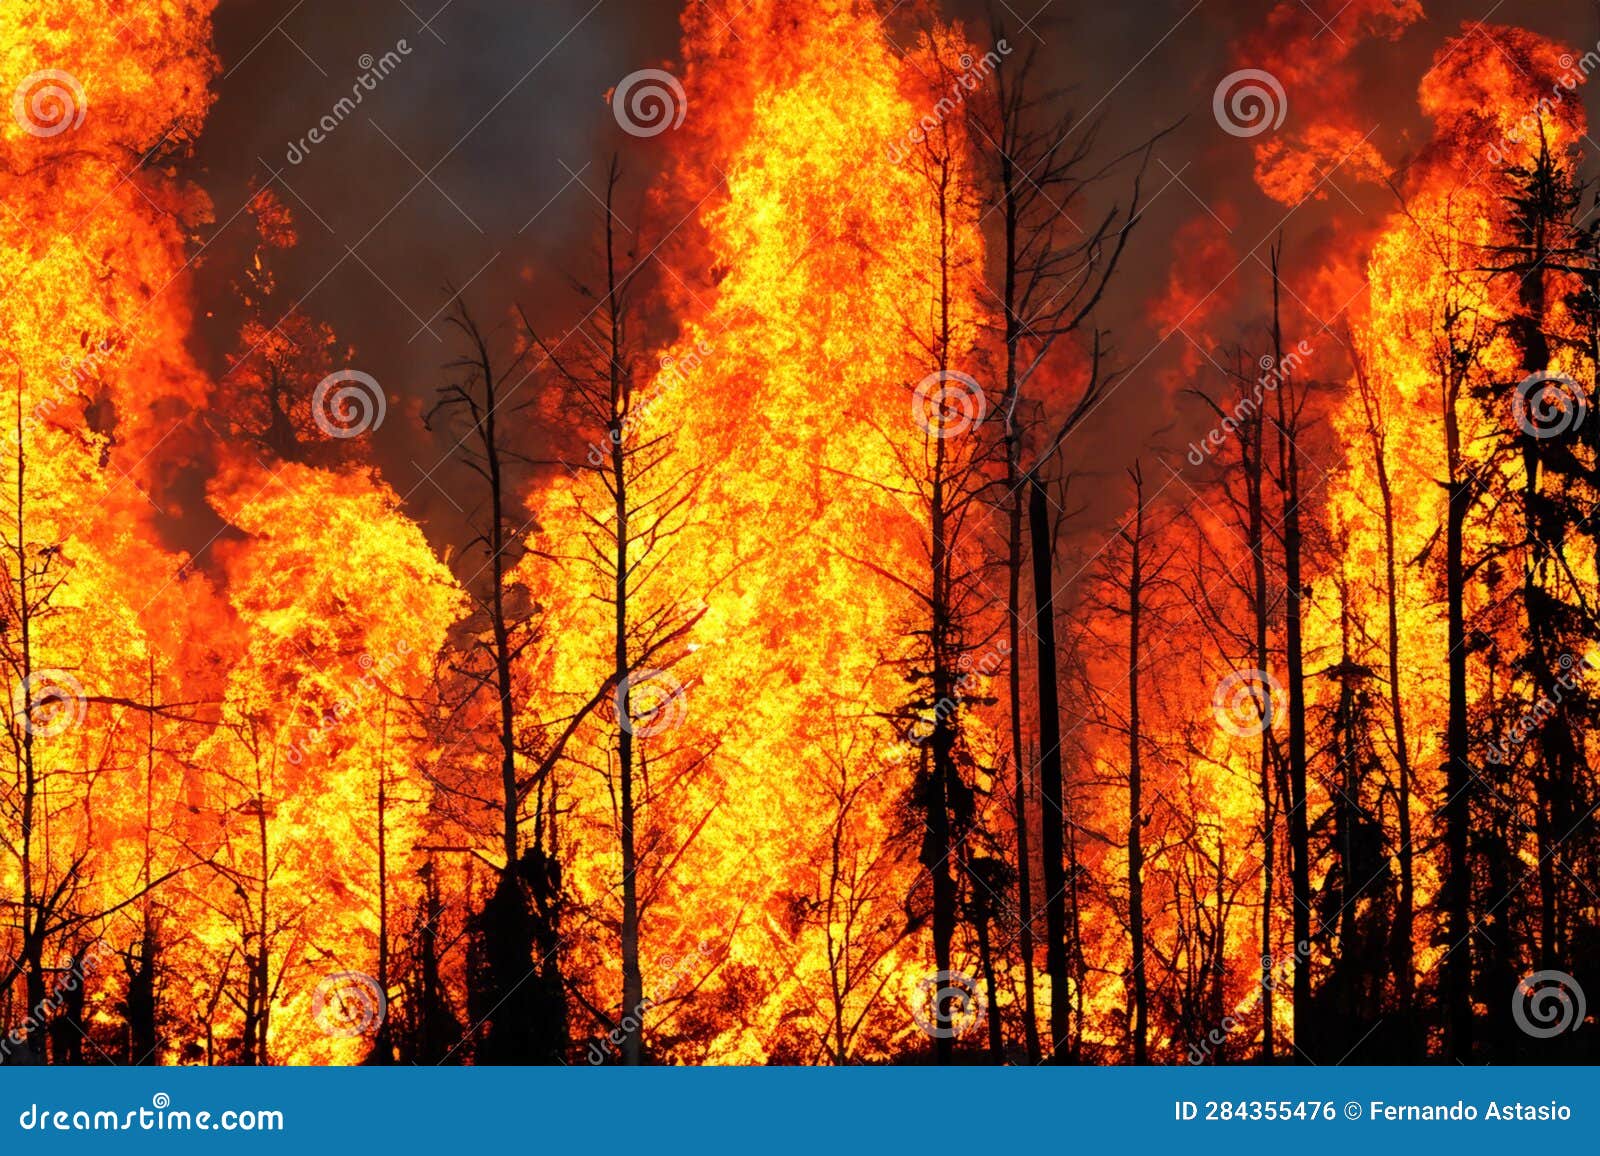 forest fire. forest fire in progress. wildfire. large flames of forest fire. incendio forestal. hawaii